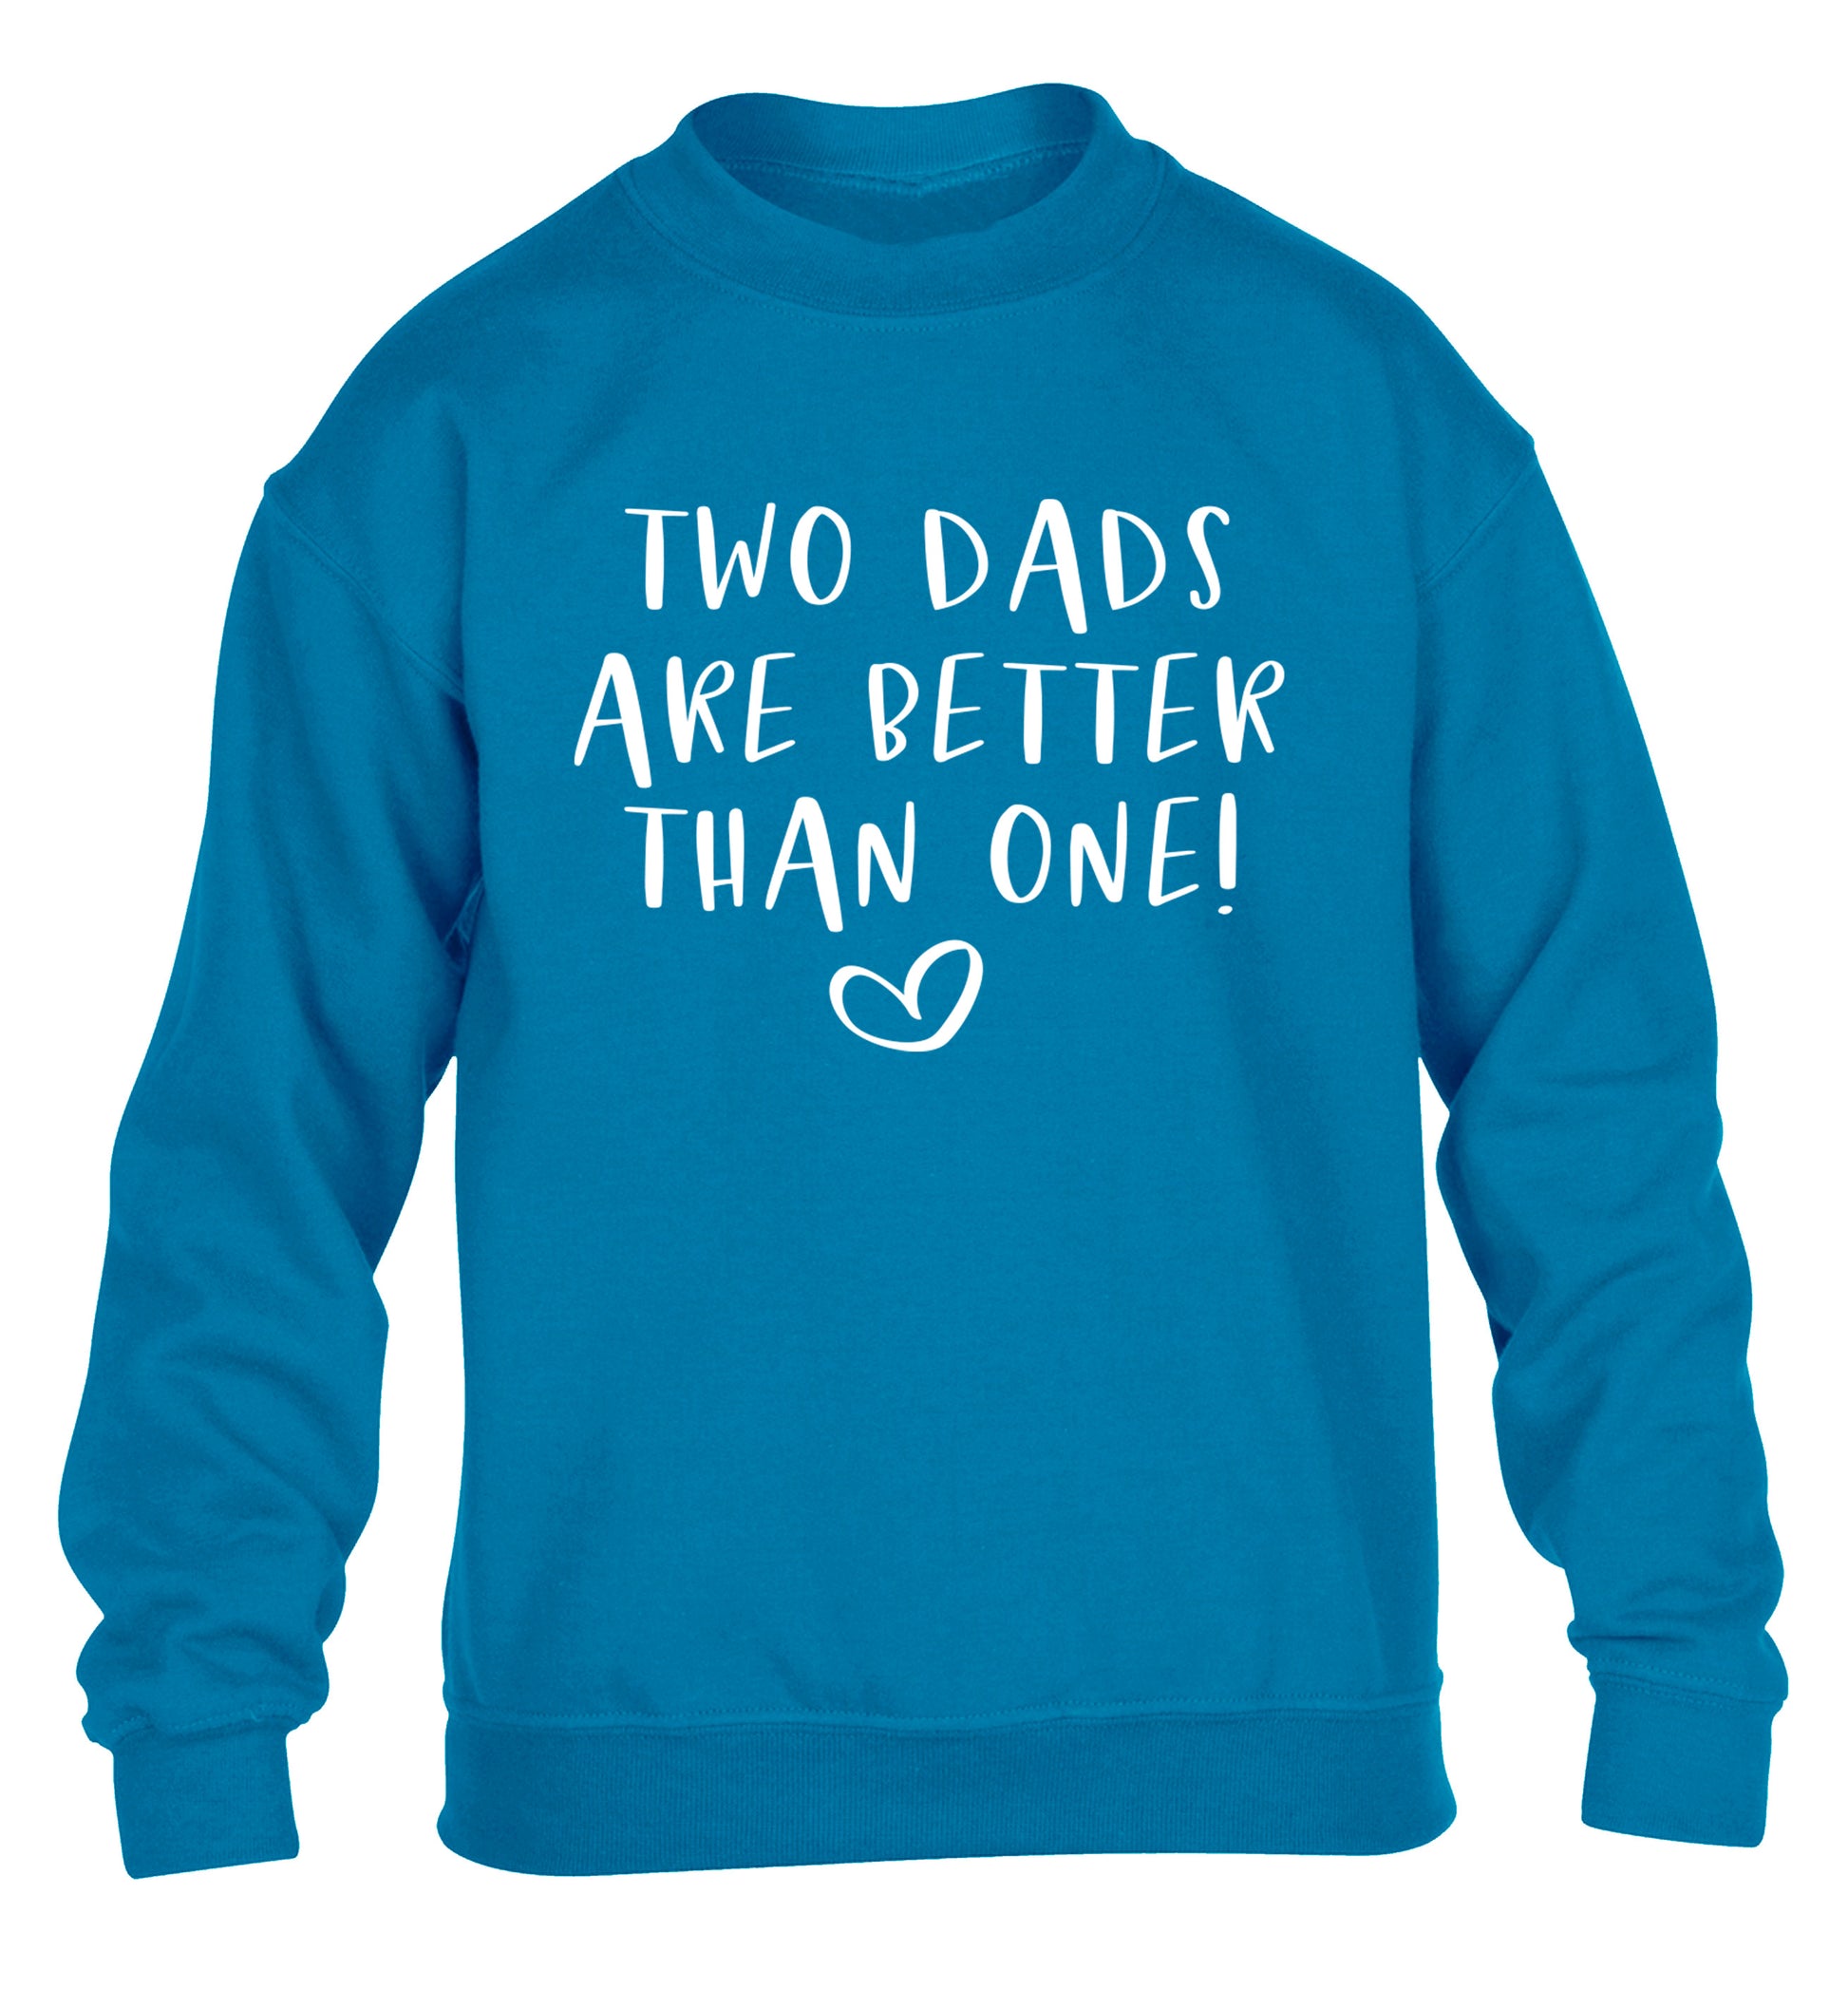 Two dads are better than one children's blue sweater 12-13 Years